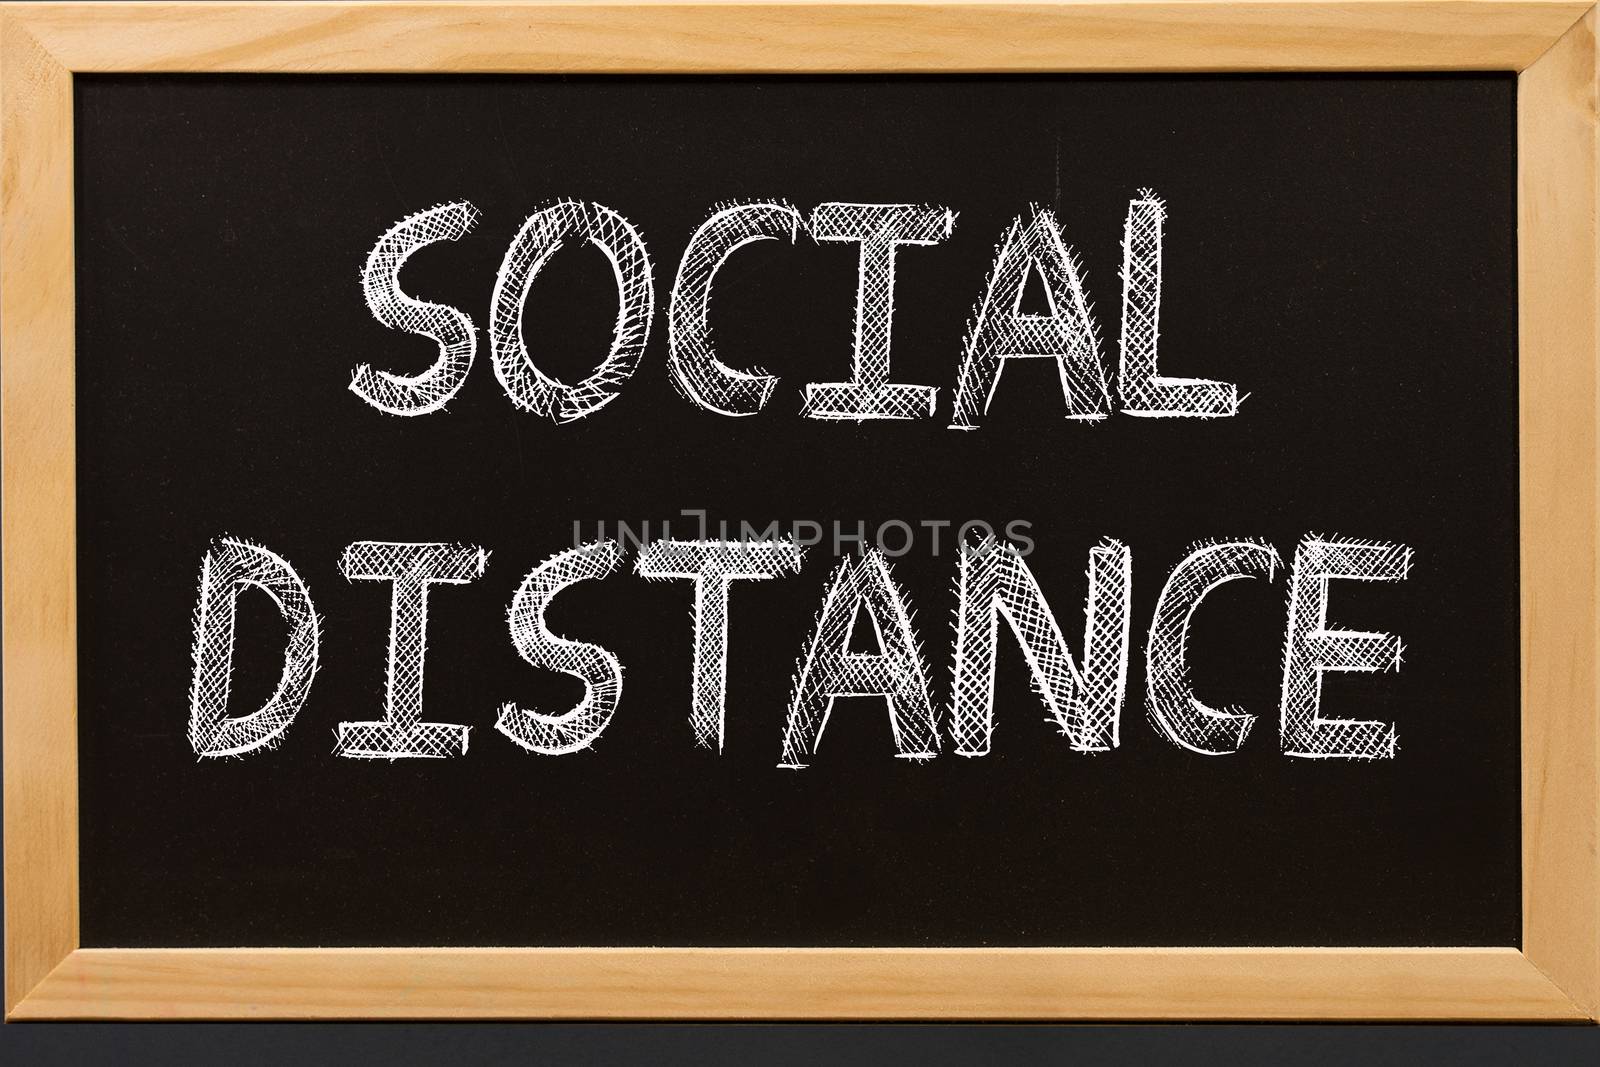 Social distance text on blackboard by Buttus_casso